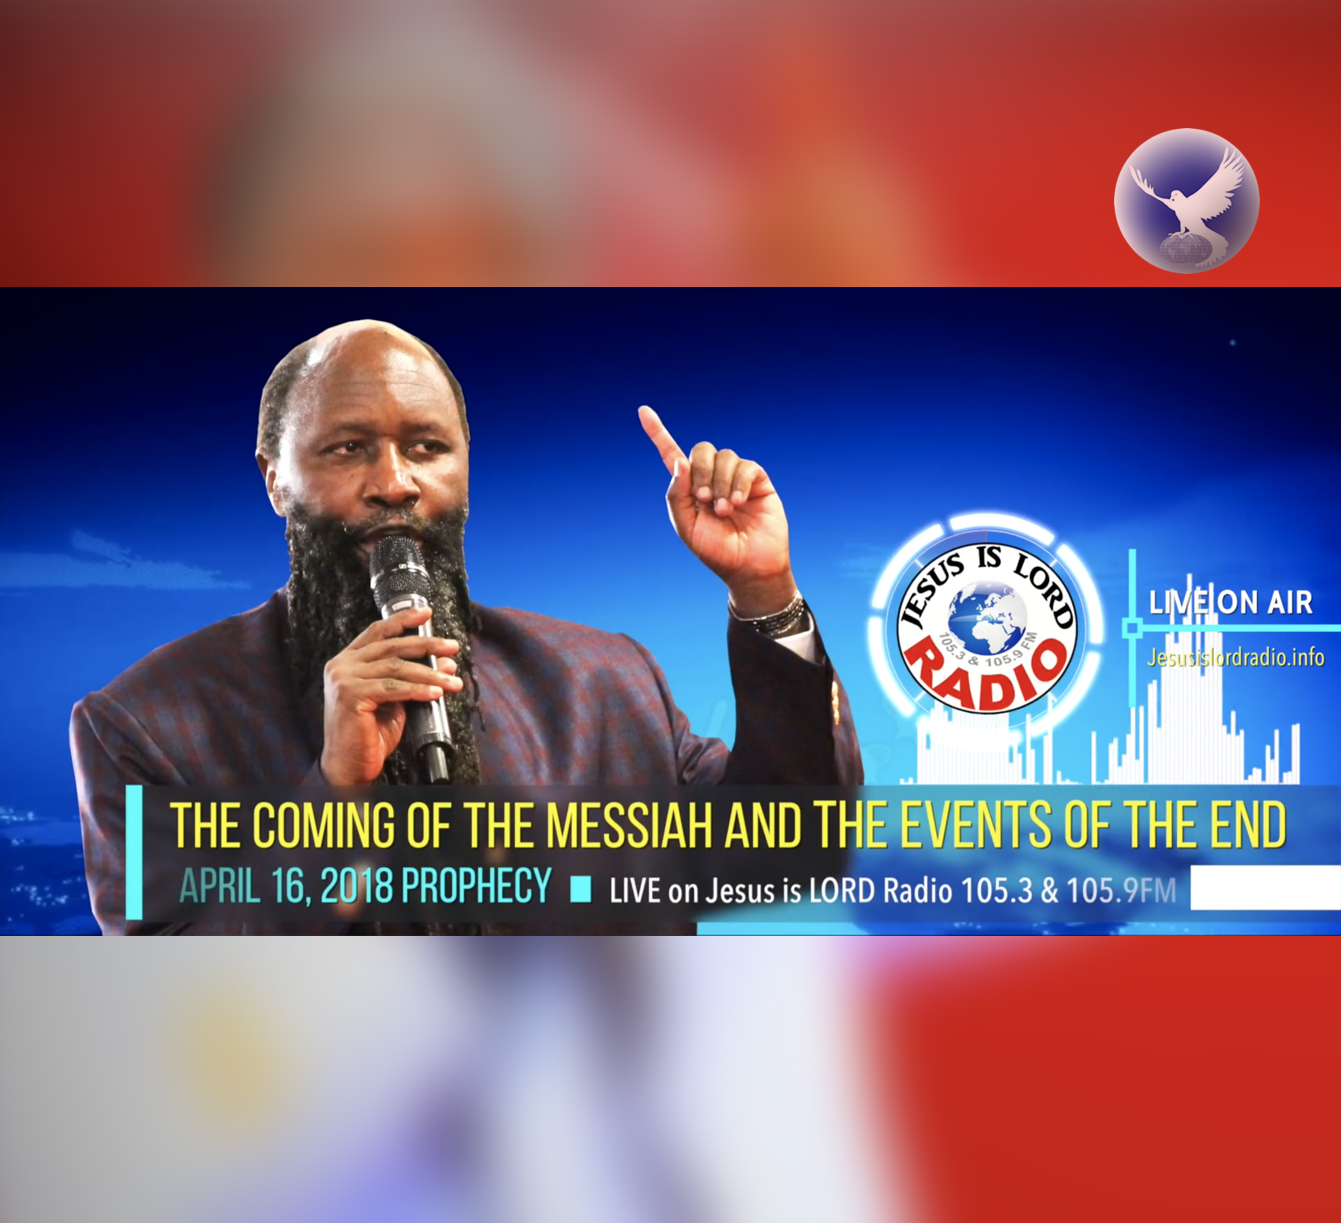 EPISODE 177 - Prophecy of The Coming of THE MESSIAH & The Events of The End (16Apr2018) - Prophet Dr. Owuor